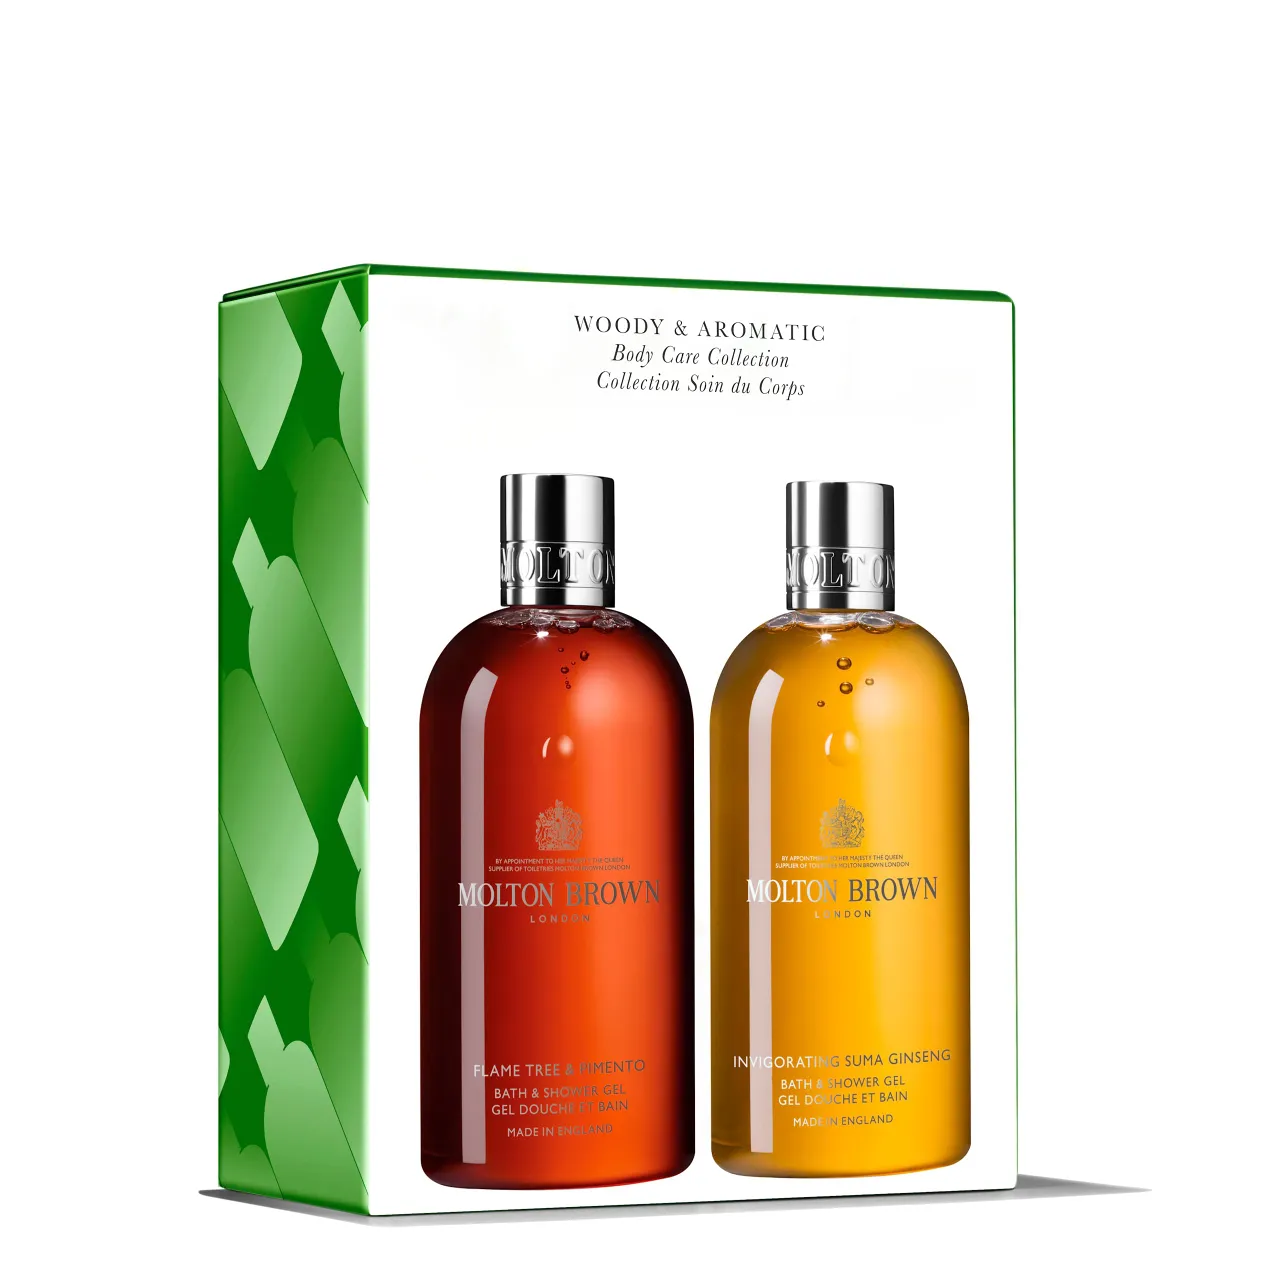 Molton Brown Woody en Aromatic Body Care Collection